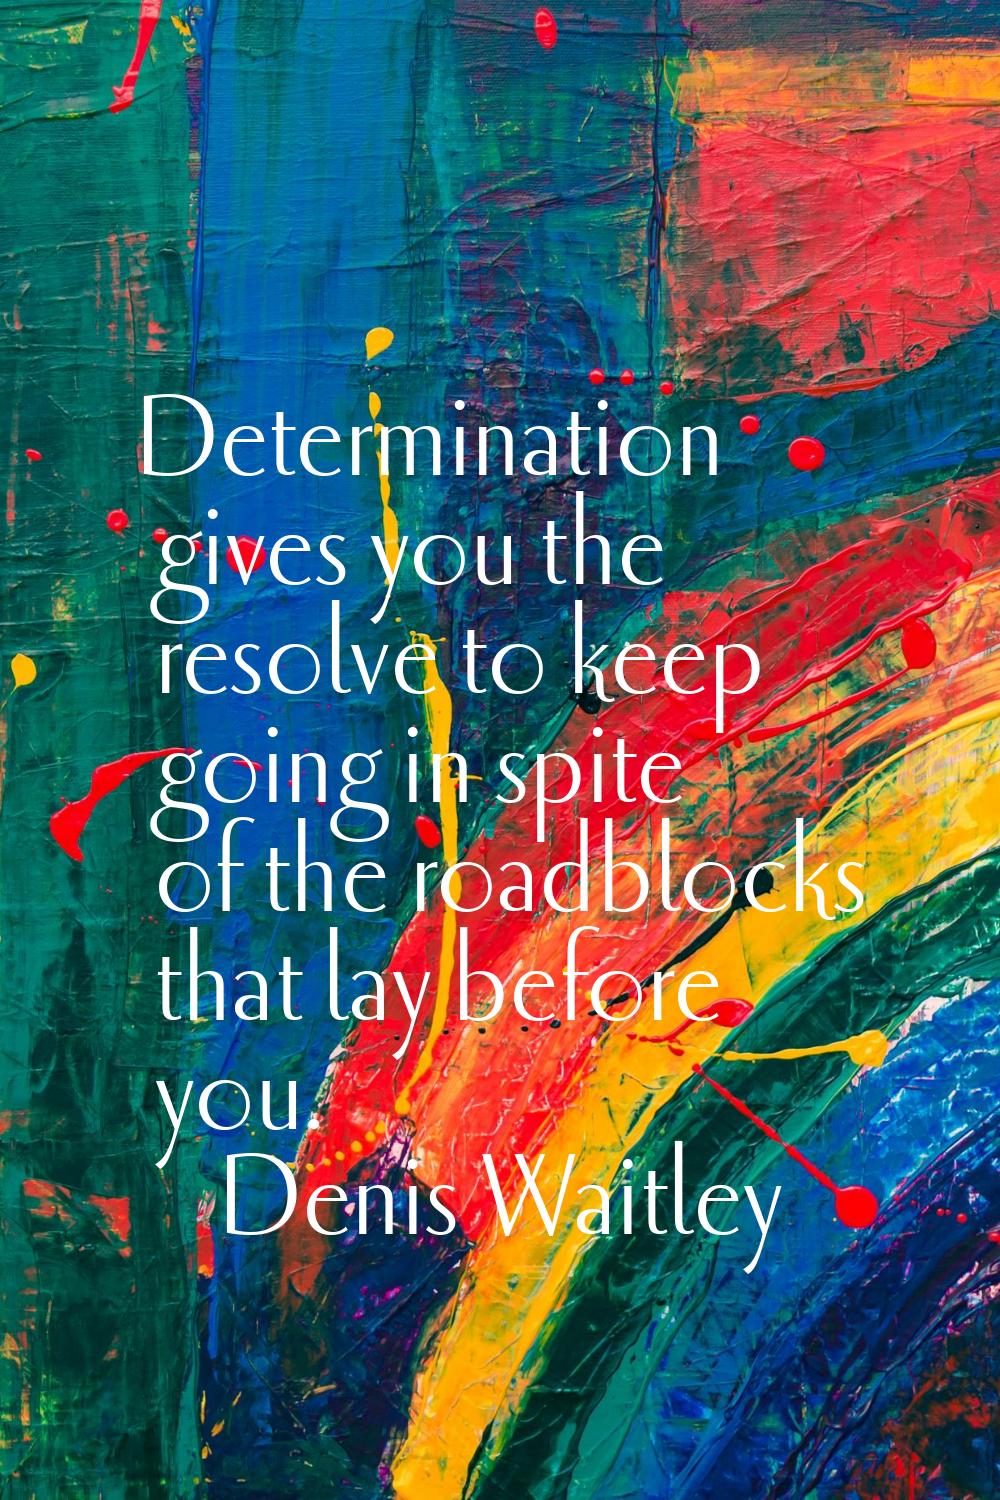 Determination gives you the resolve to keep going in spite of the roadblocks that lay before you.